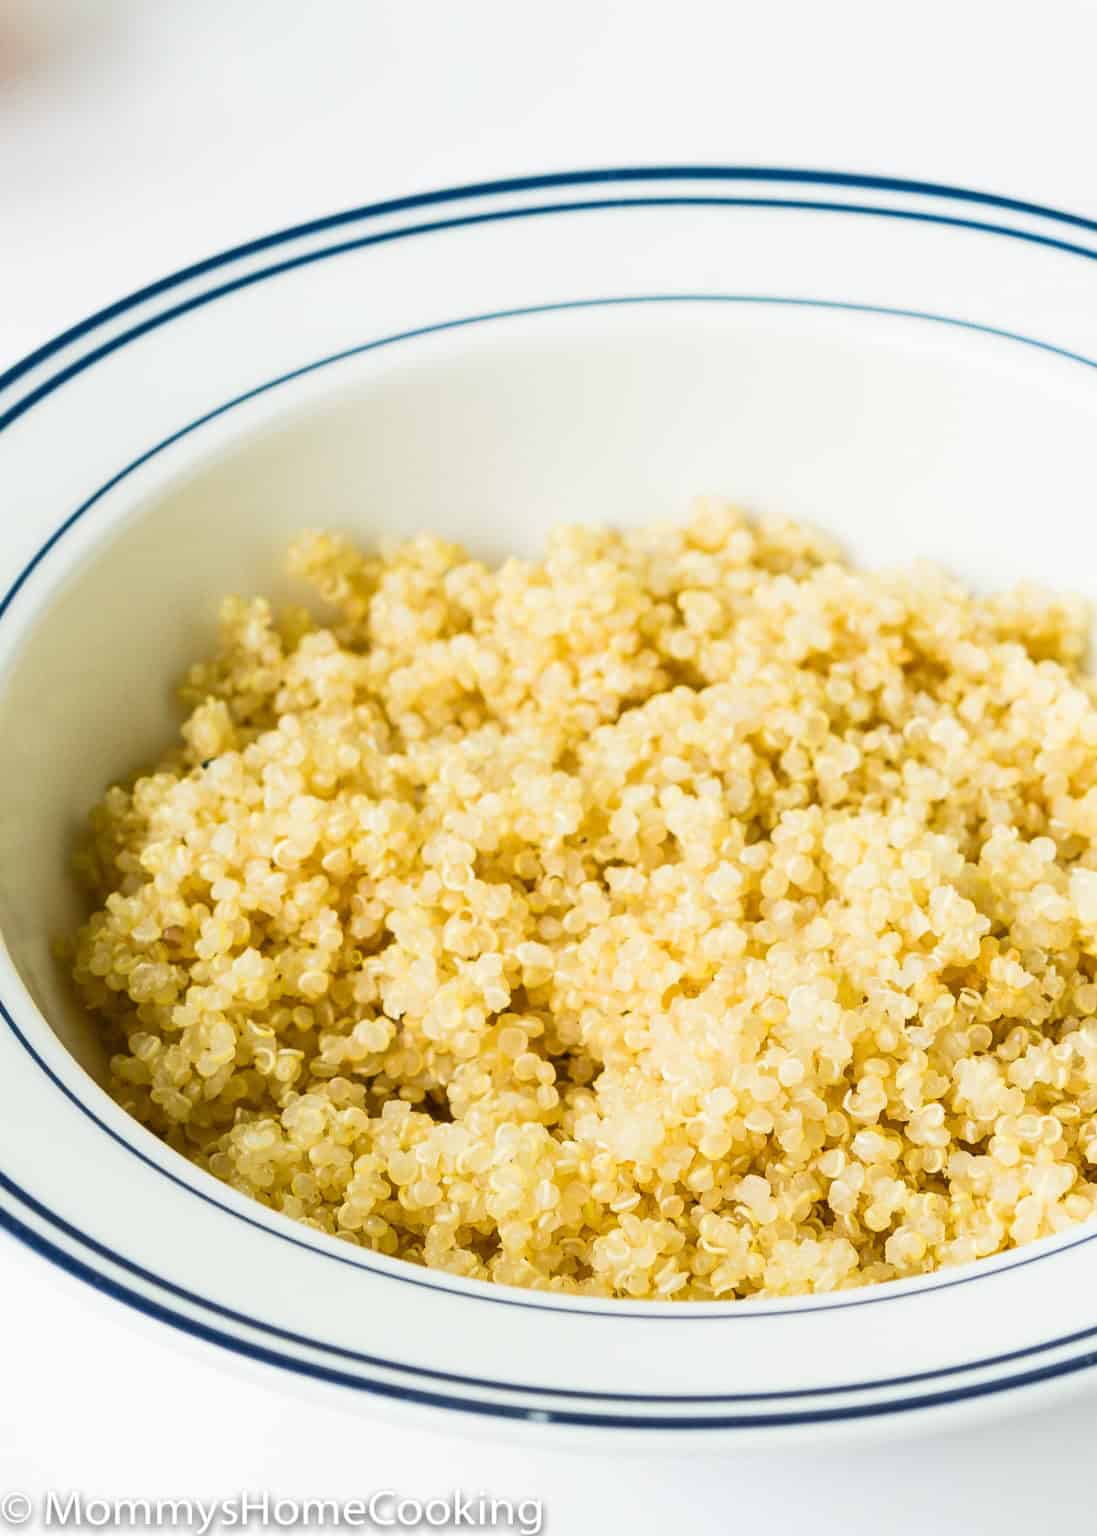 How to Make Quinoa [Video] - Mommy's Home Cooking